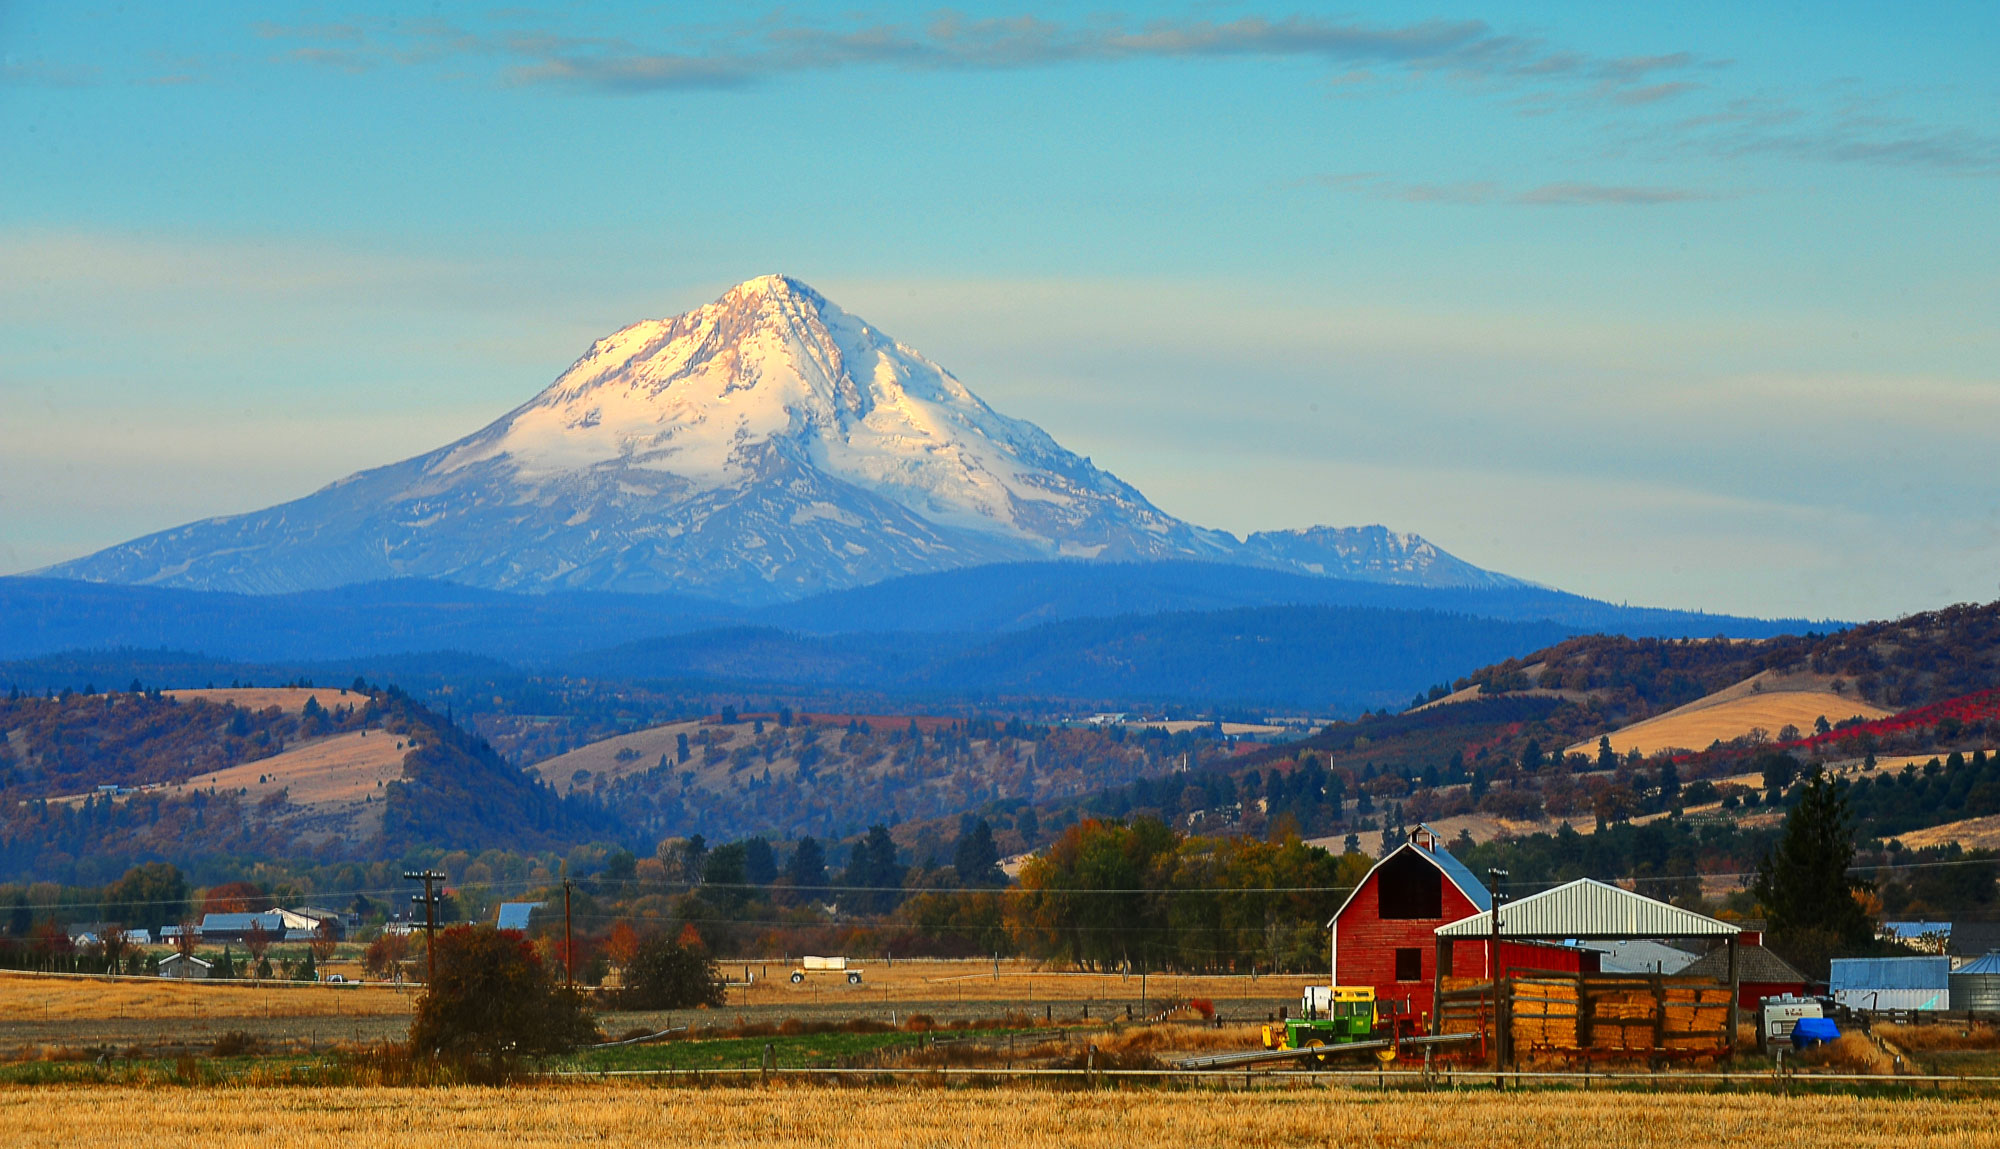 Photograph of Mt. Hood in Oregon. The mountain has the classic conical shape of a stratovolcano.